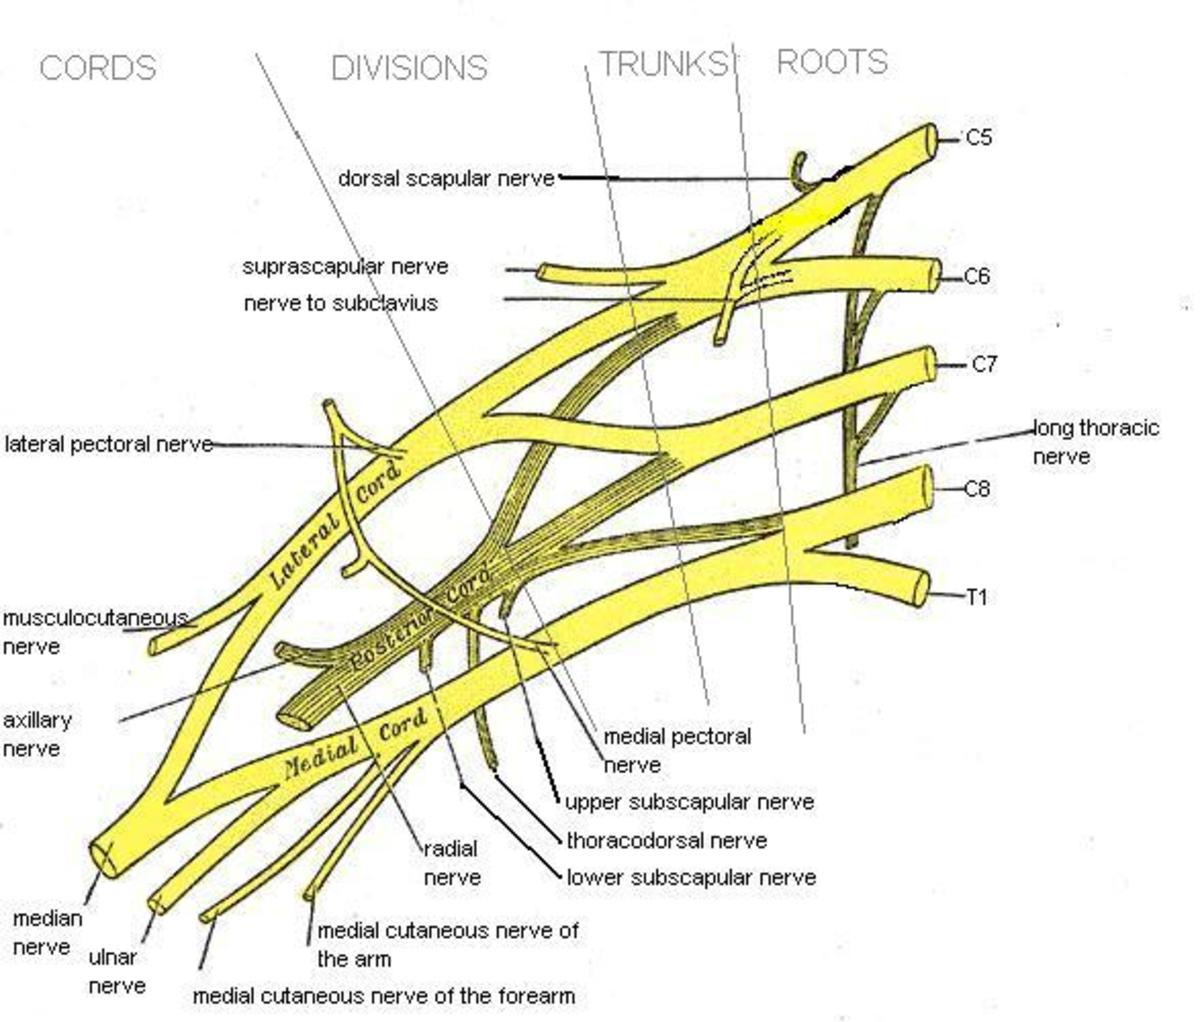 Diagram shows the brachial plexus - note the combinations and divisions that end up becoming the nerves of the shoulder, arm and hand. 